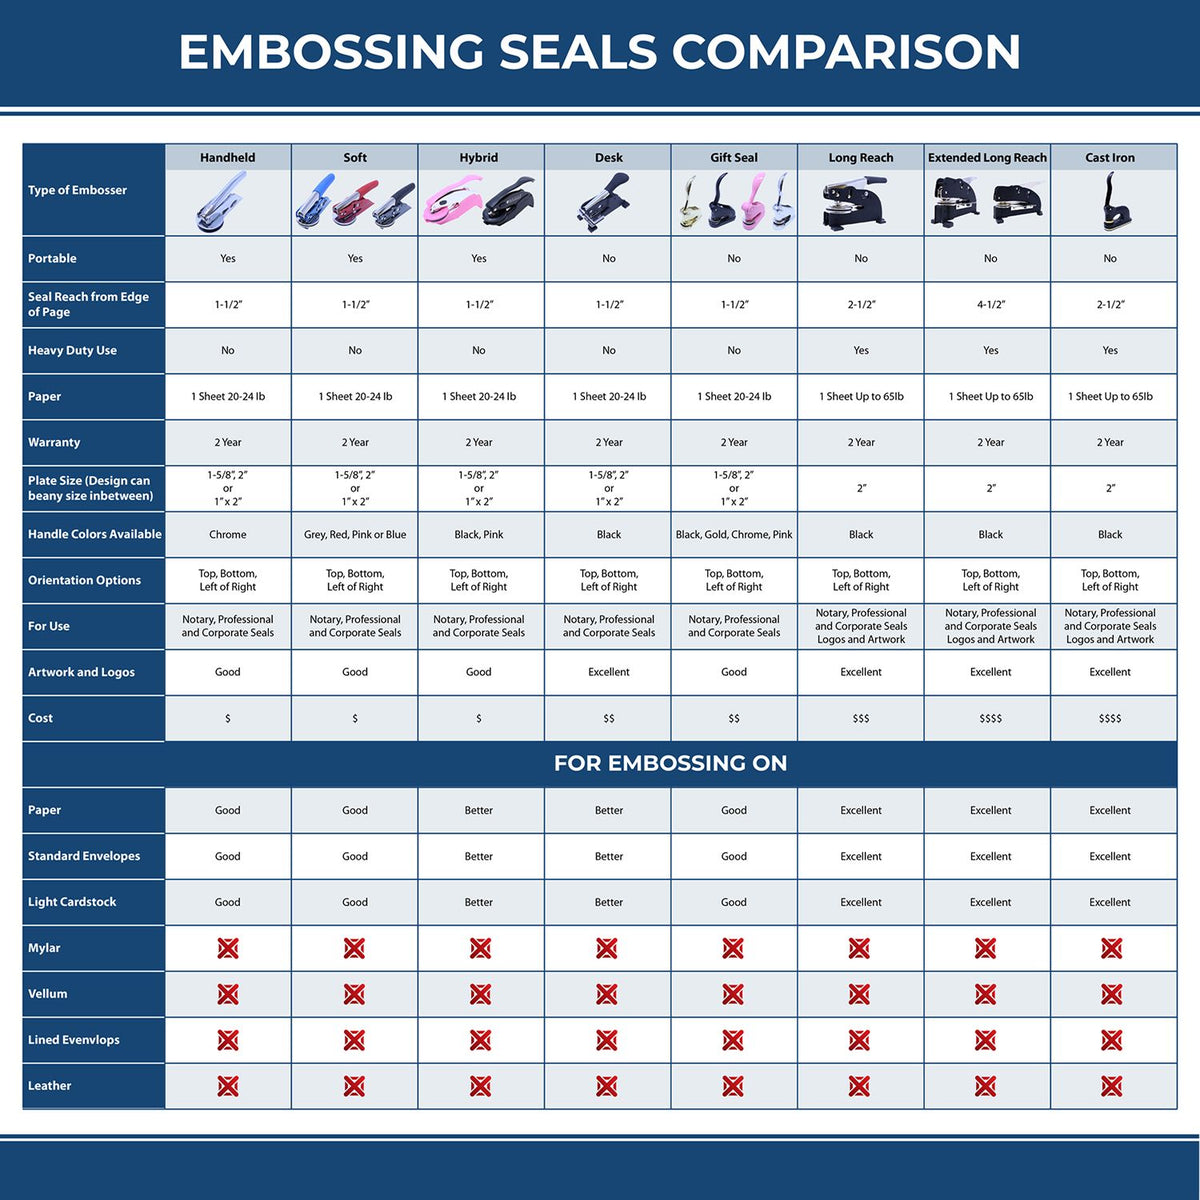 A comparison chart for the different types of mount models available for the Michigan Desk Surveyor Seal Embosser.